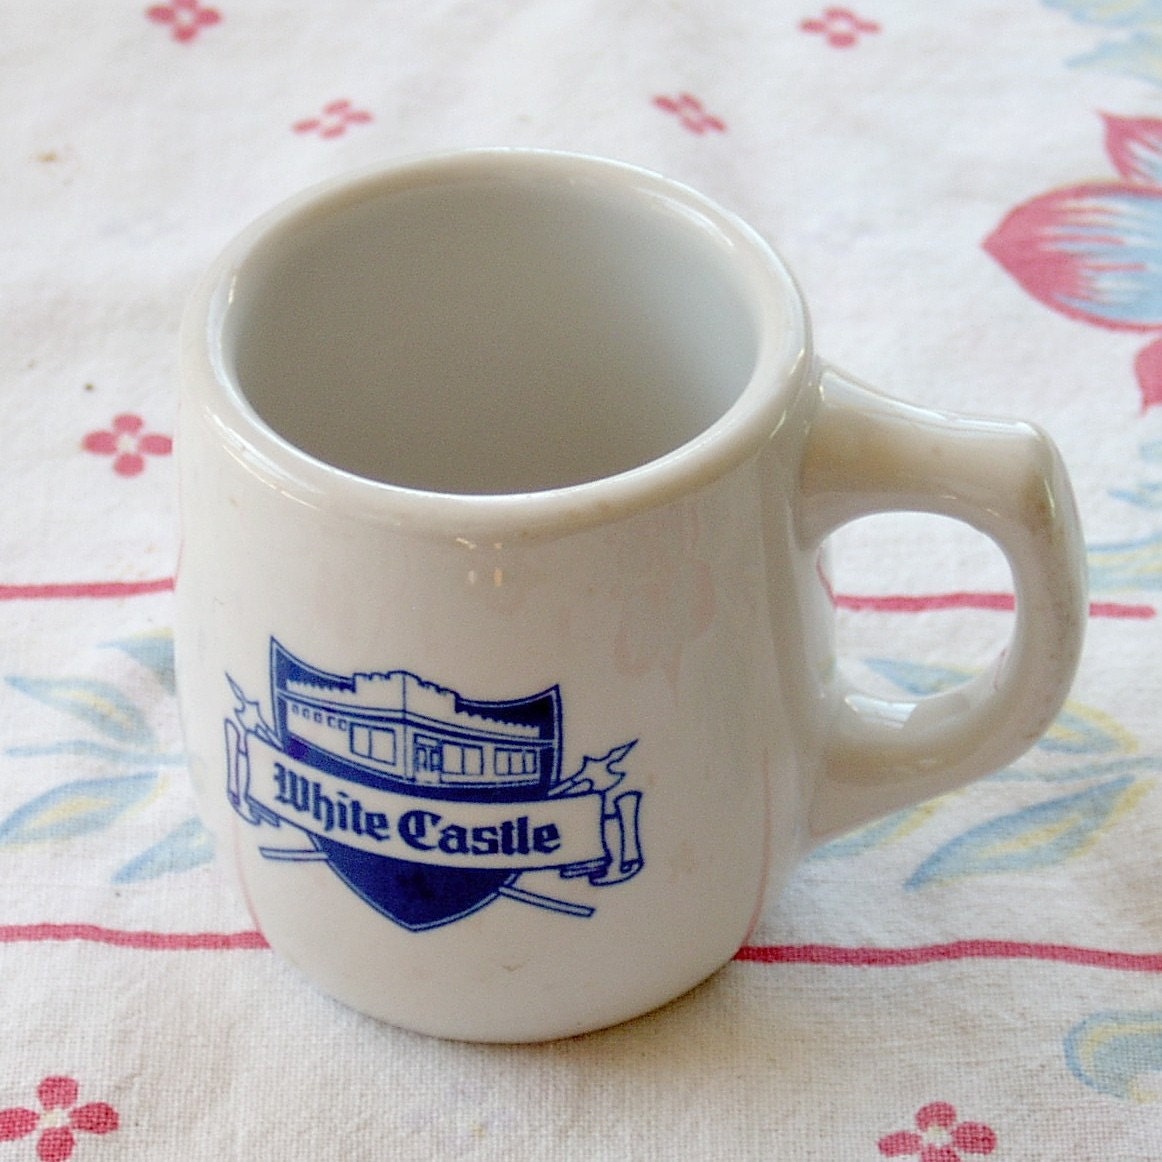 Vintage White Castle Coffee Cup by kitschhaus on Etsy